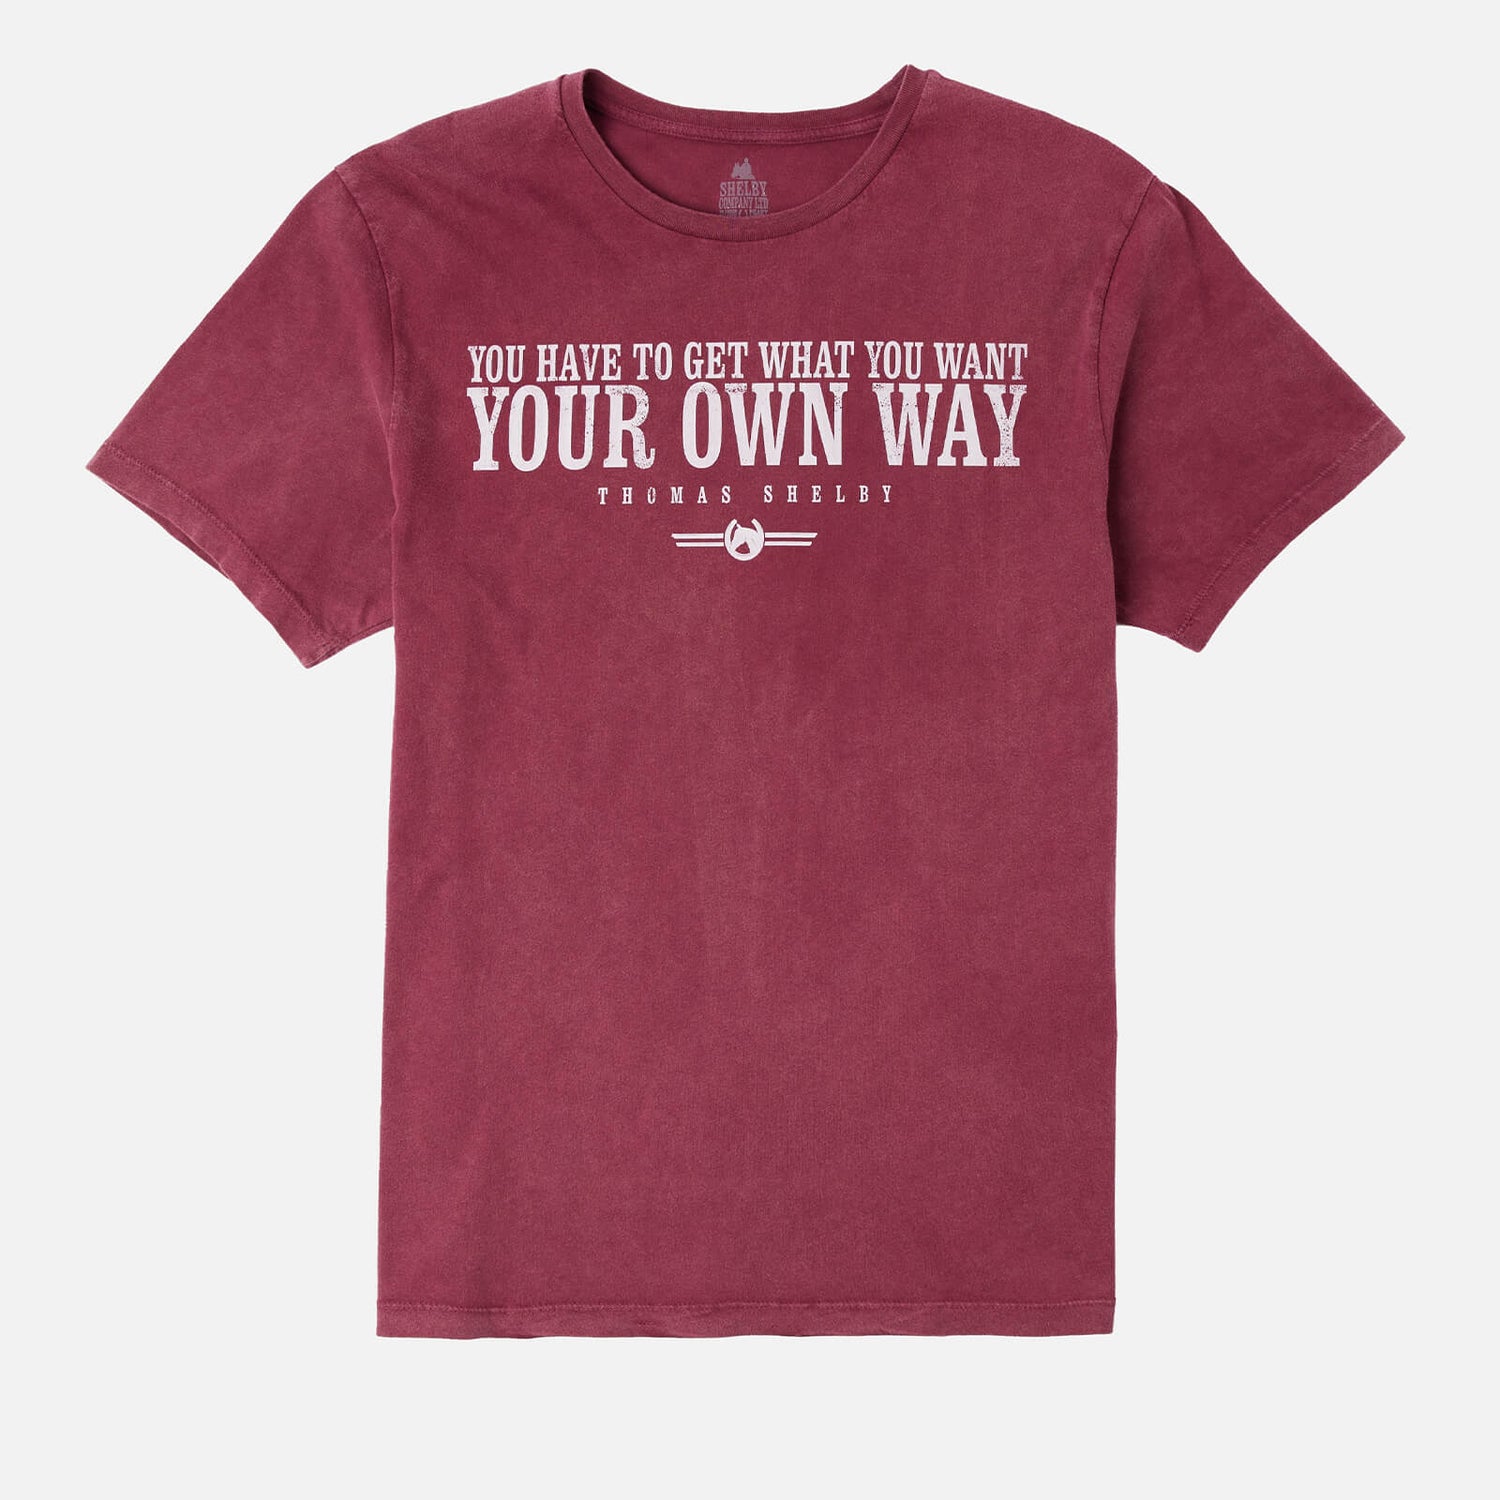 Peaky Blinders You Have To Get What You Want Your Own Way Men's T-Shirt - Burgundy Acid Wash